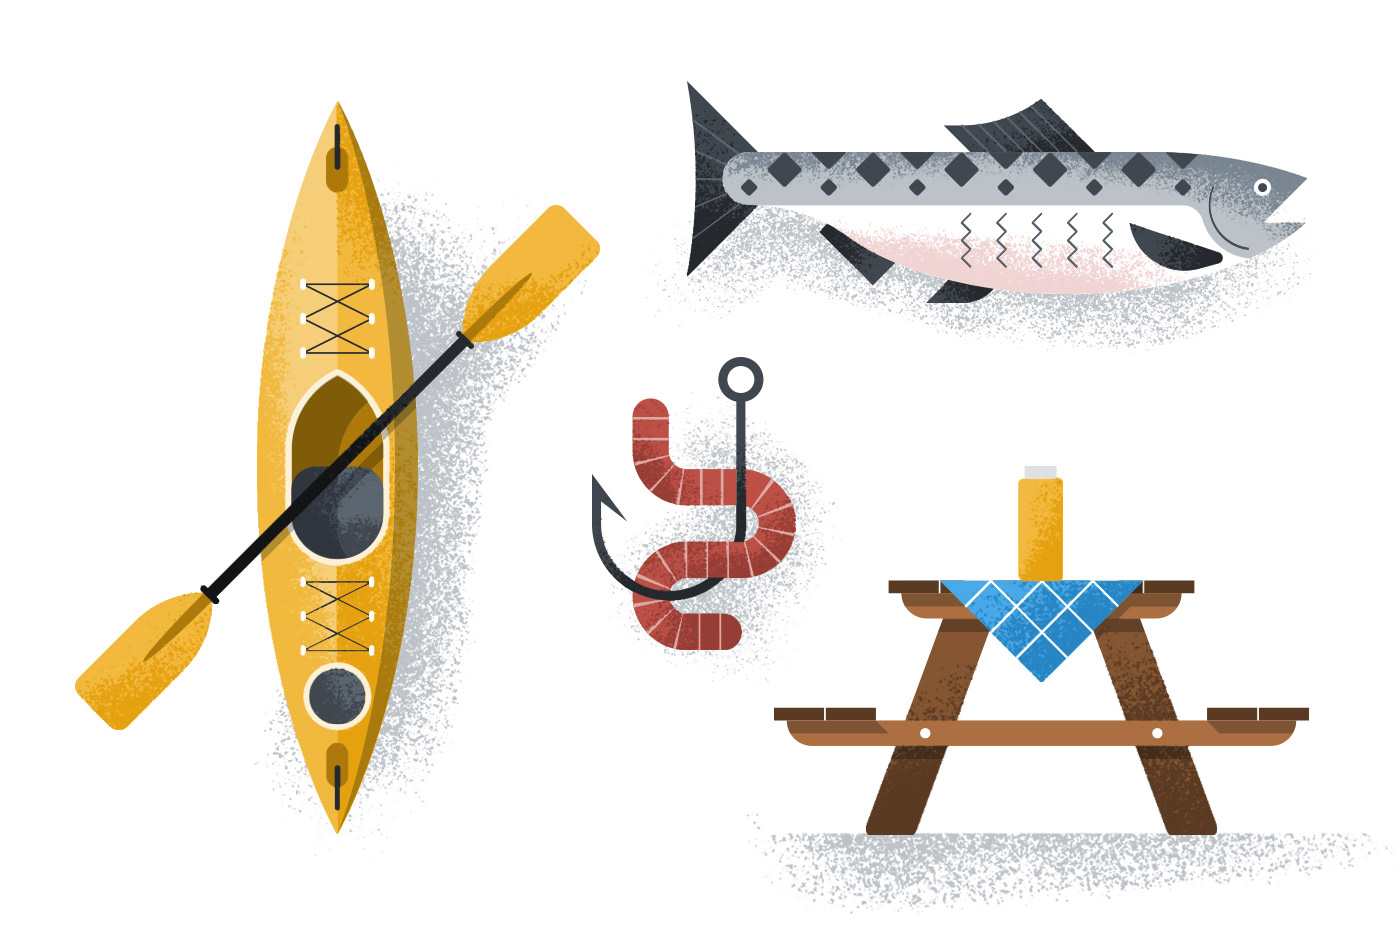 Illustrated icons of fishing, kayaking, salmon and outdoor activities by Adrian Bauer